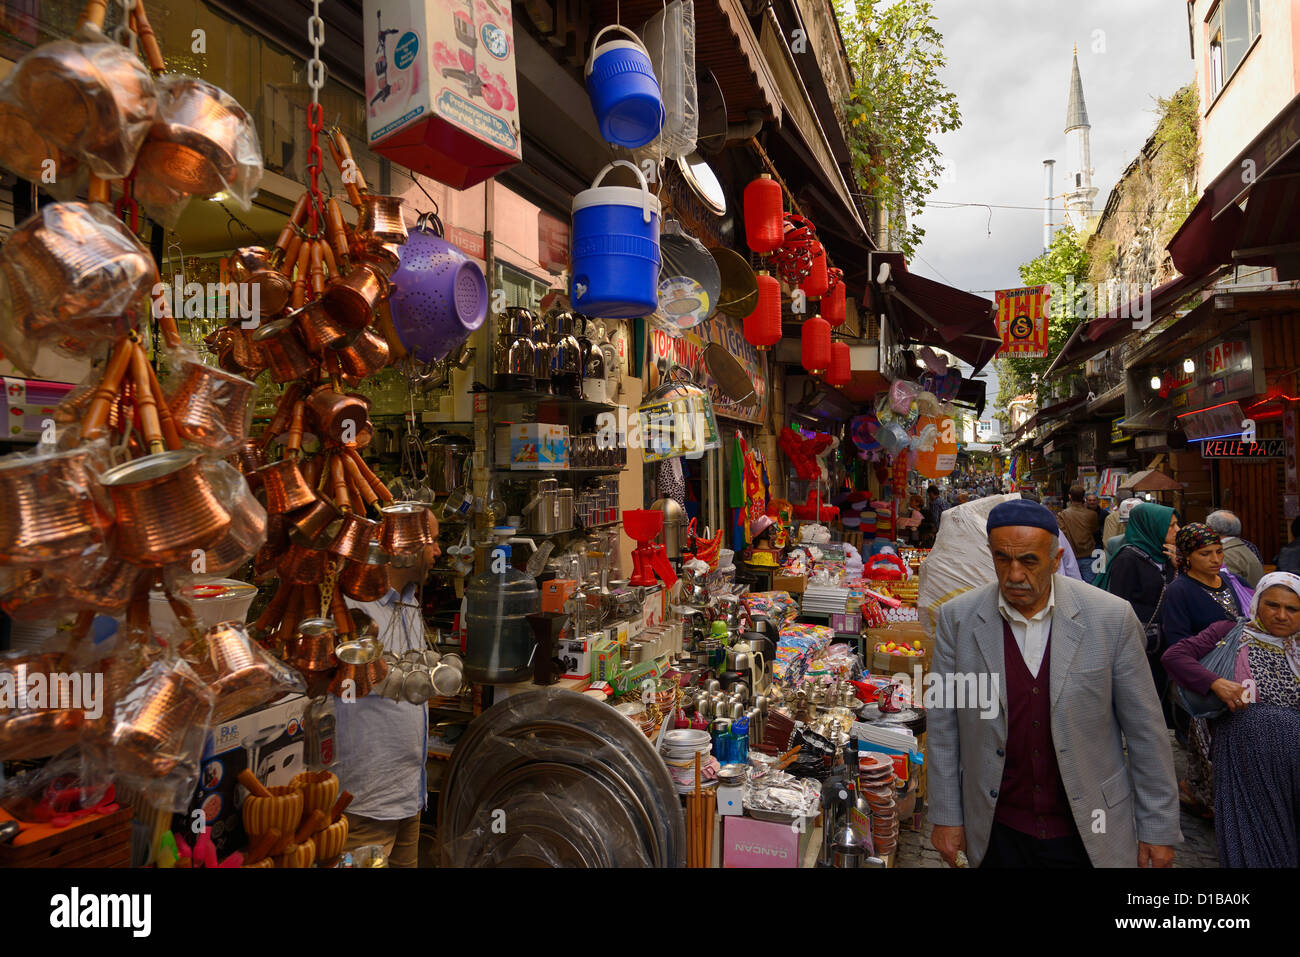 Local Turkish people shopping near the Egyptian Spice Market in Istanbul Turkey Stock Photo